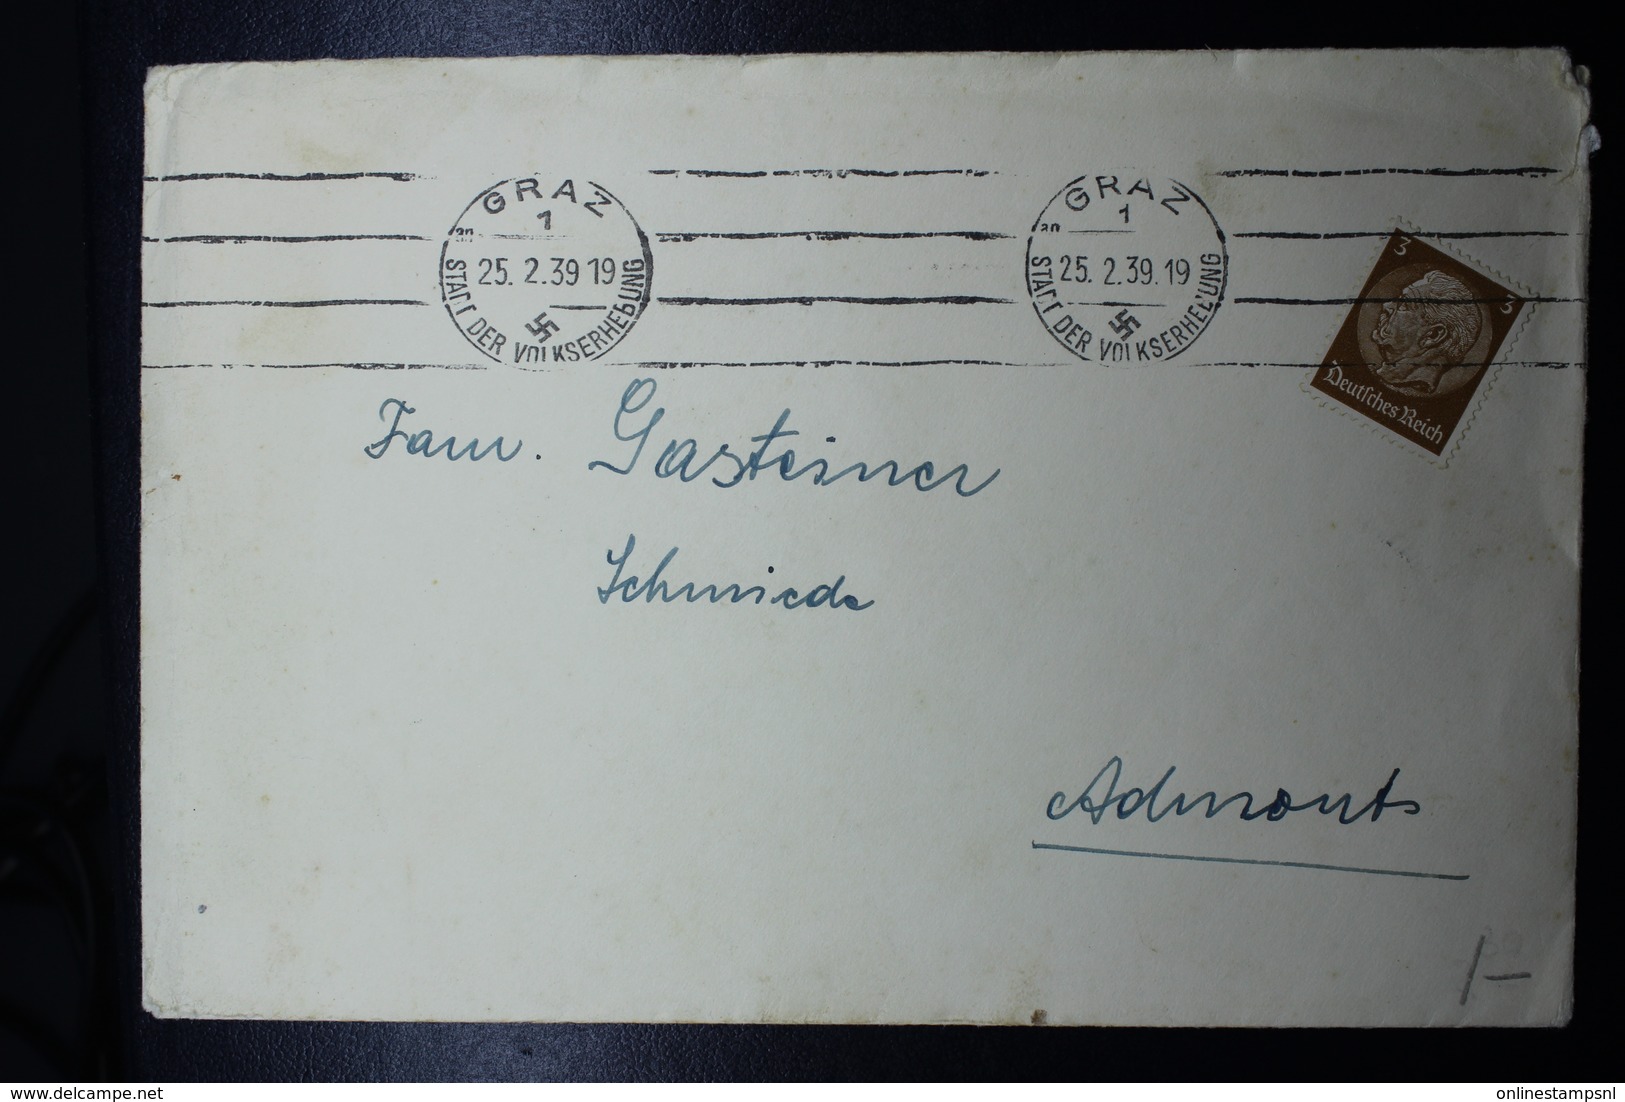 Austria Anschluss and Occupation related letters, cards, fragments and stamps, collection.